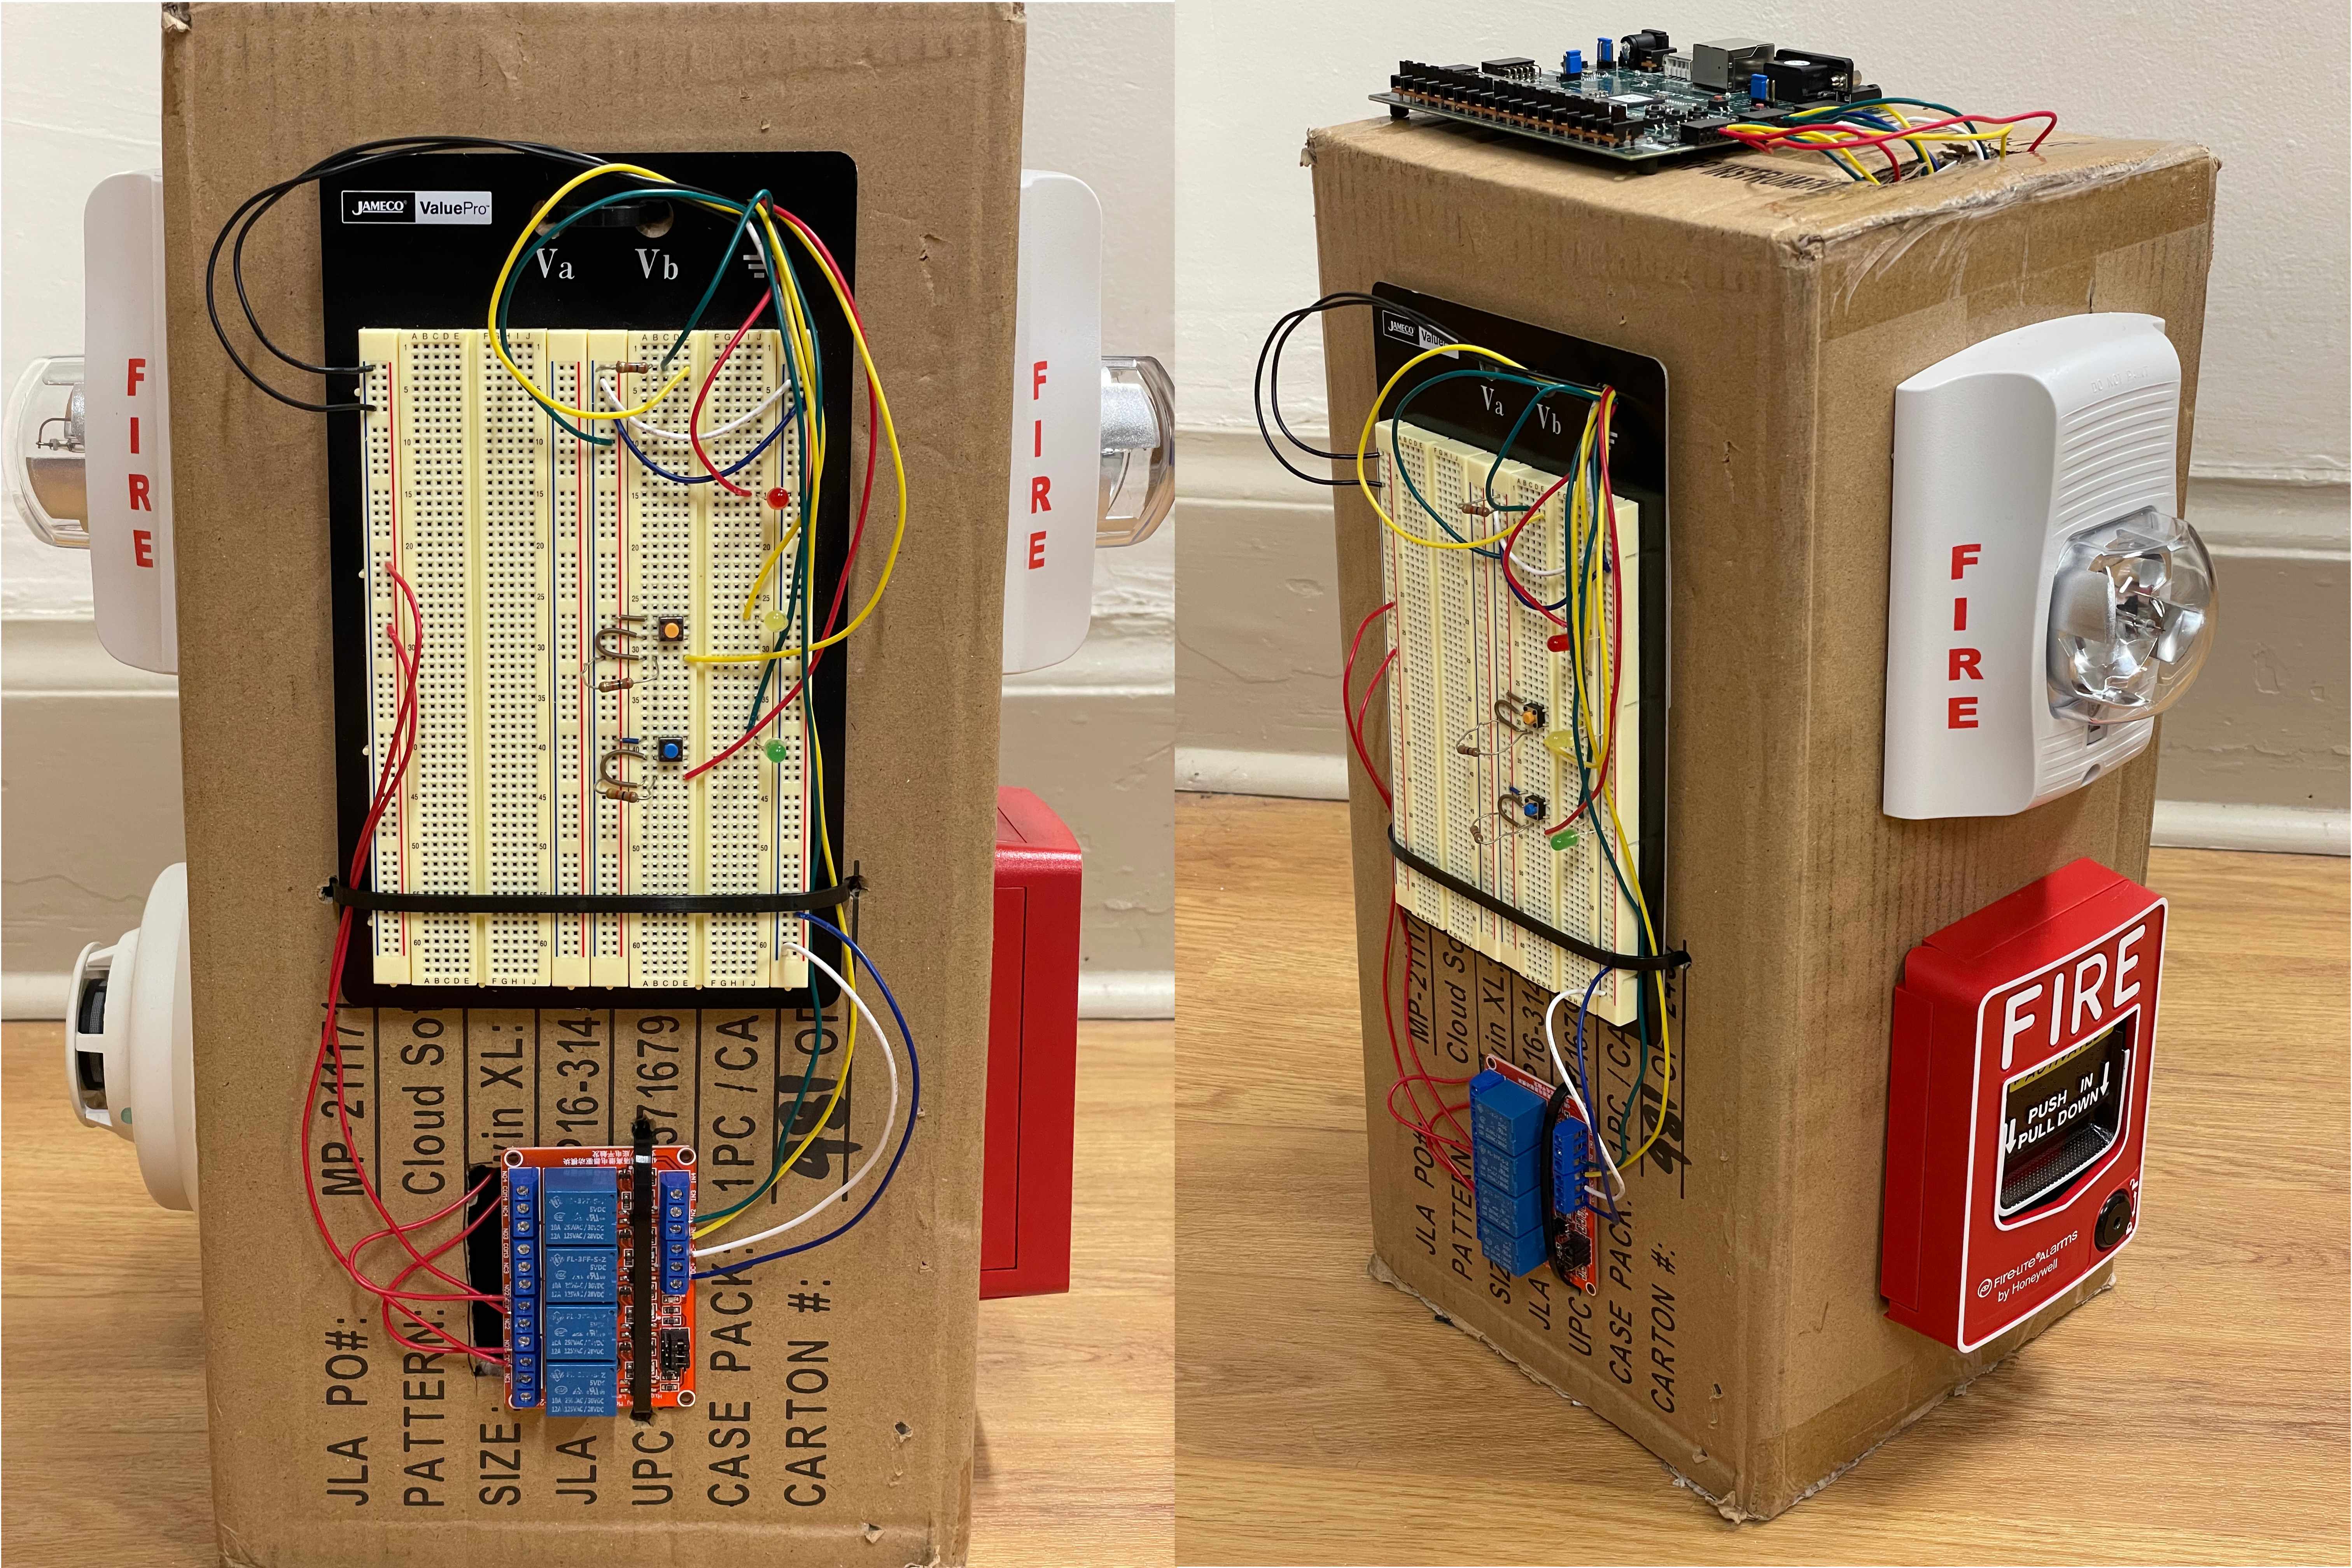 Corner view of FPGA fire alarm control panel, showing breadboard, relay, strobe and pull station